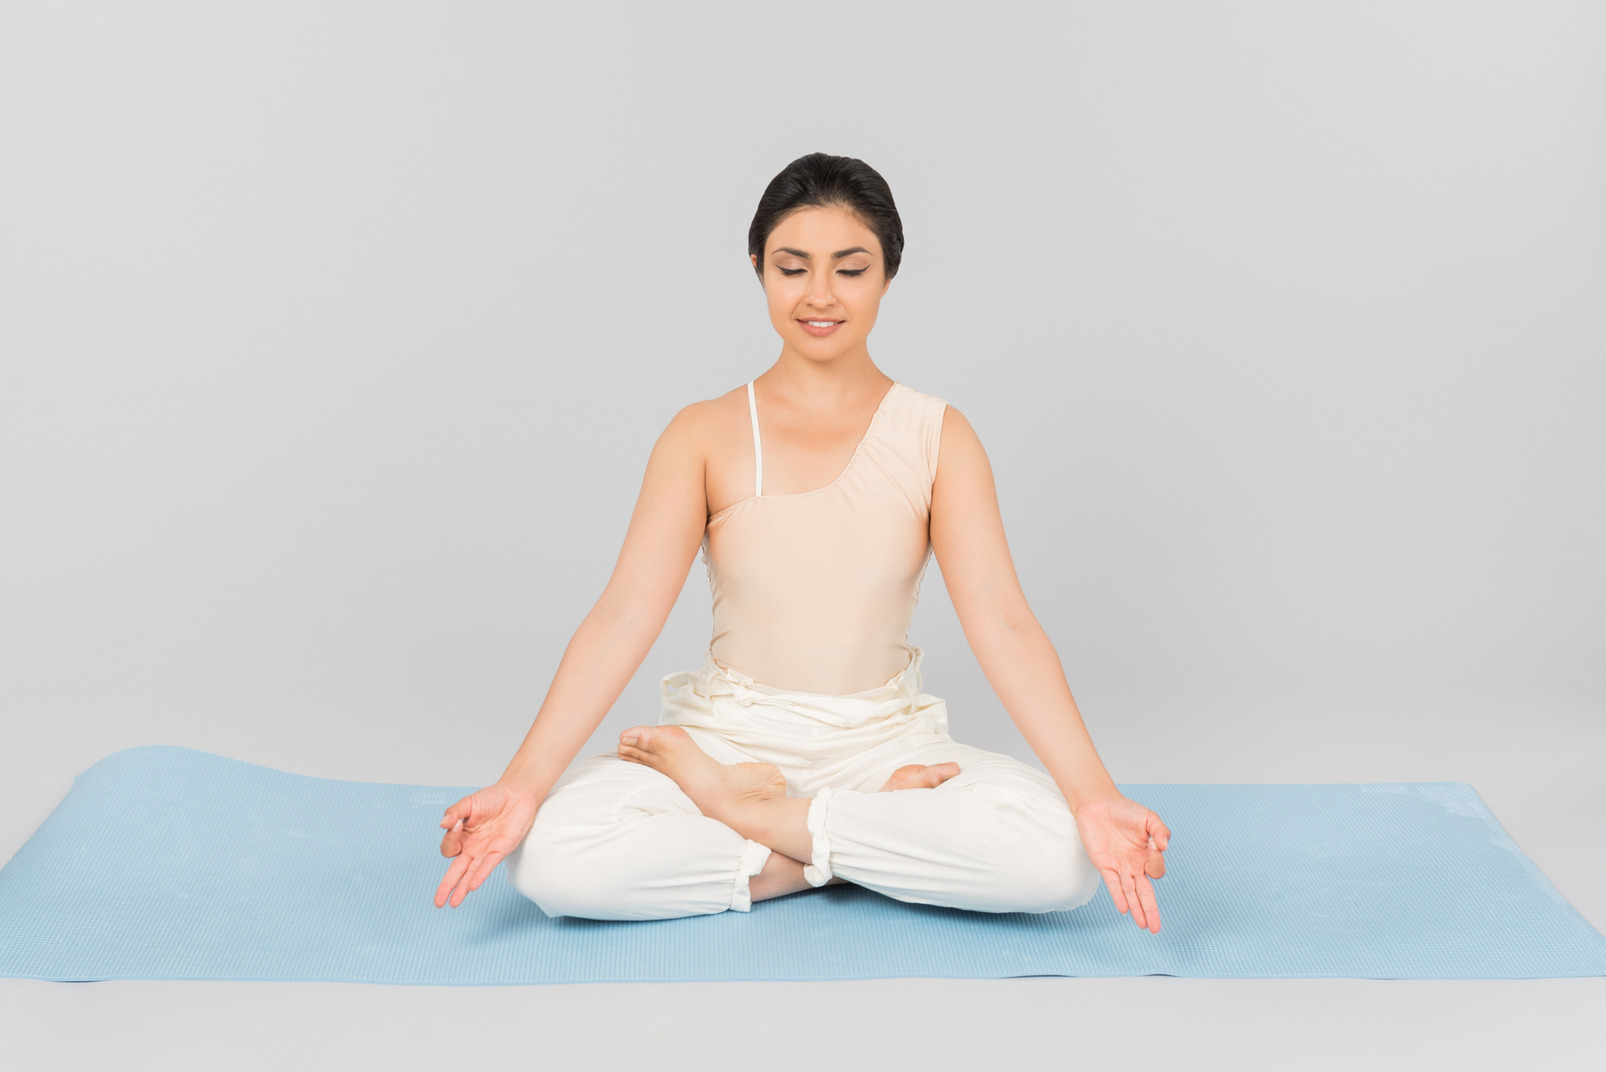 Young indian woman with legs crossed and hands extended sitting on yoga mat